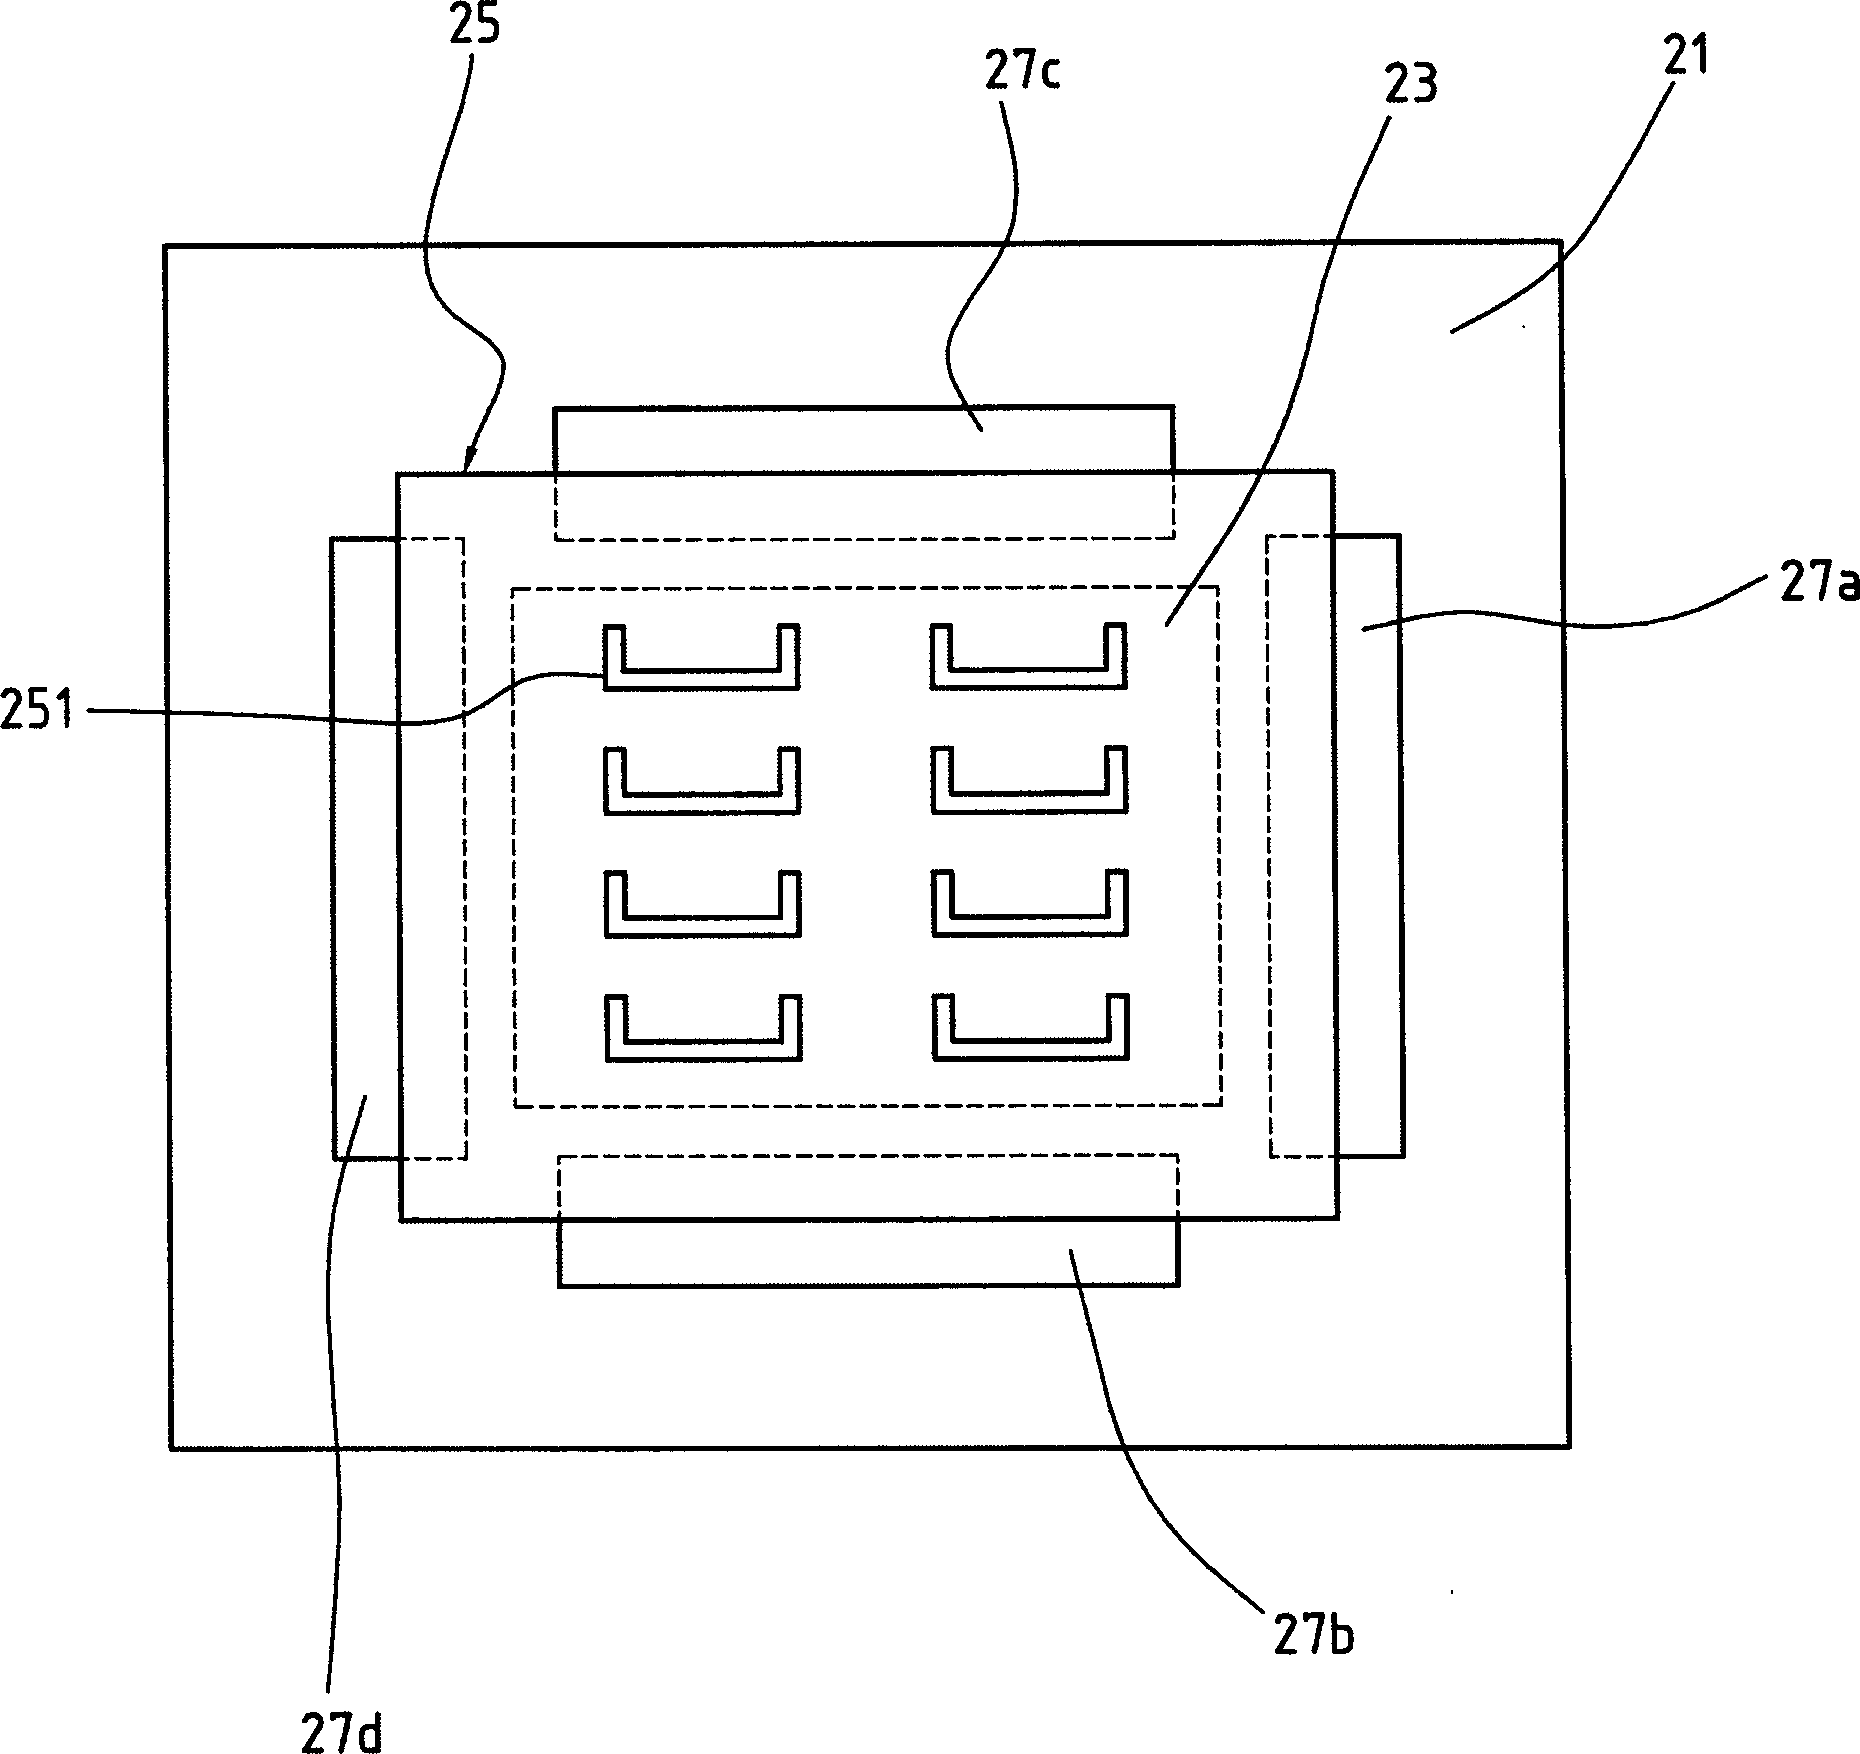 Bevel edge processing method for multi plate printed circuit board after printing and fluting, and its milling cutter